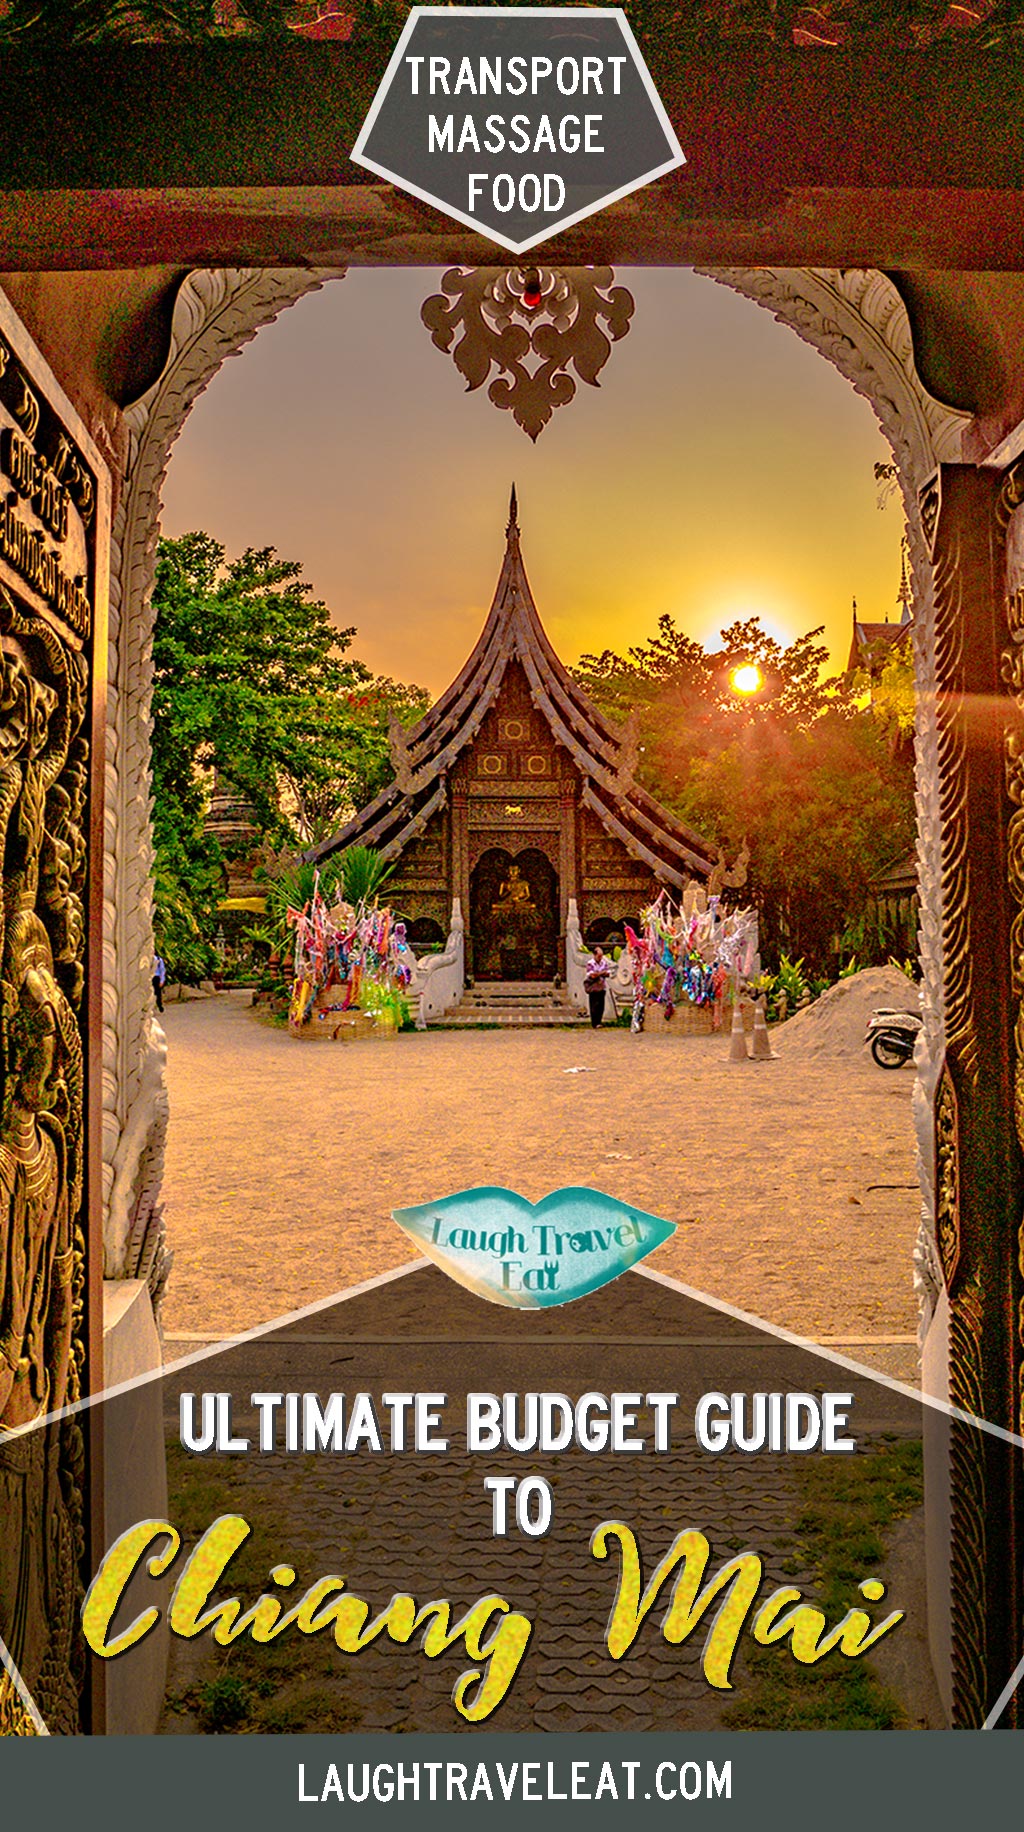 First time visiting Chiang Mai? Fear not, here's a budget and price guide to Chiang Mai's food, transport, massage, clothes, and souvenir, making sure that you wouldn't be scammed in markets #ChiangMai #Thailand #PriceGuide